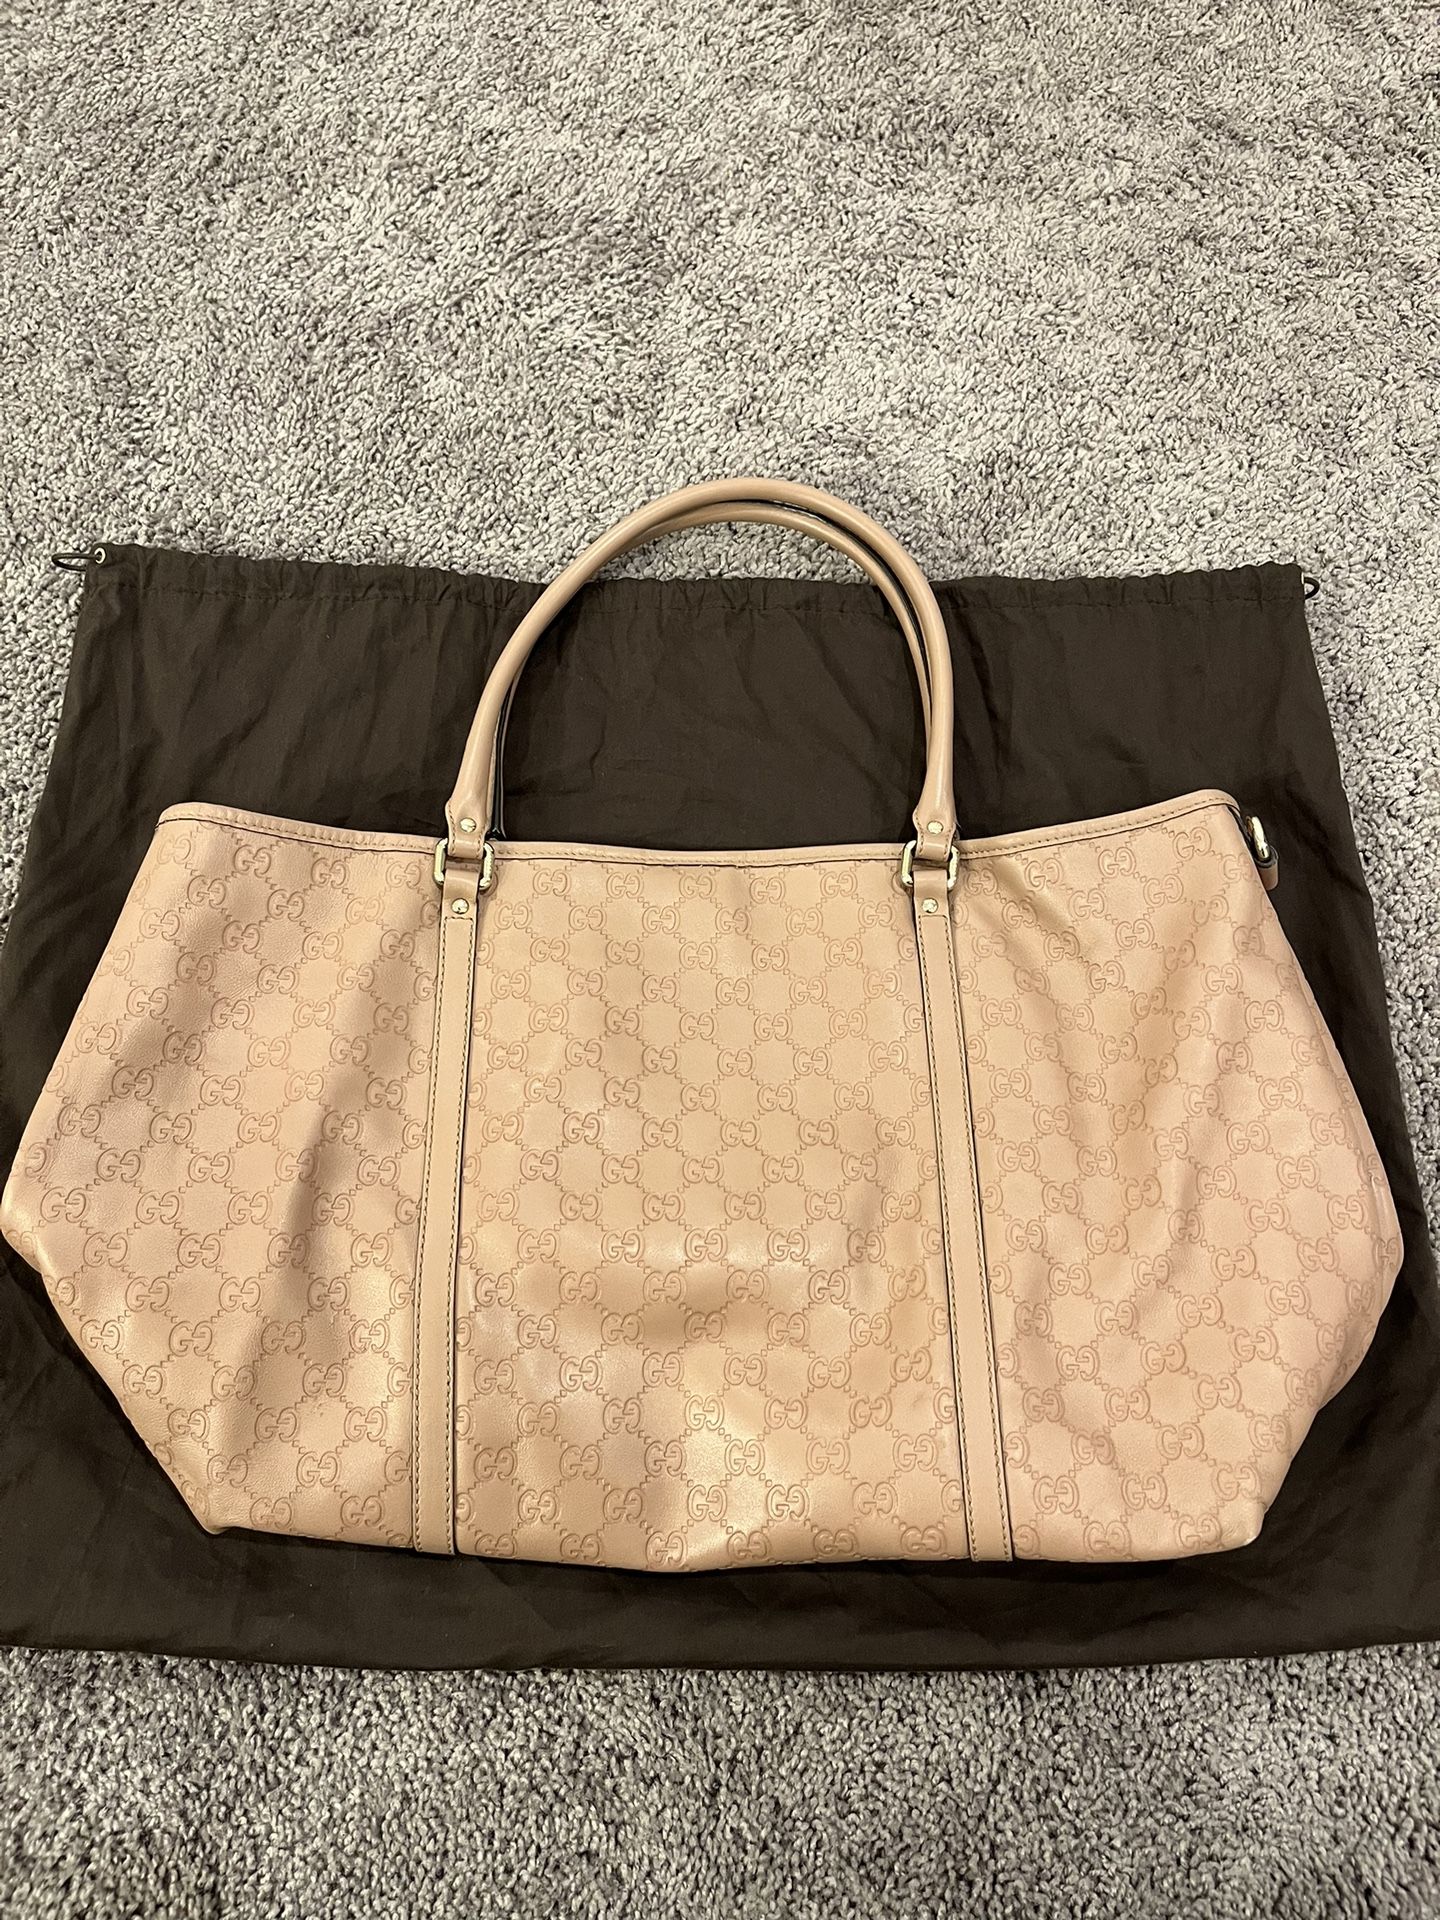 Authentic Gucci Leather Tote